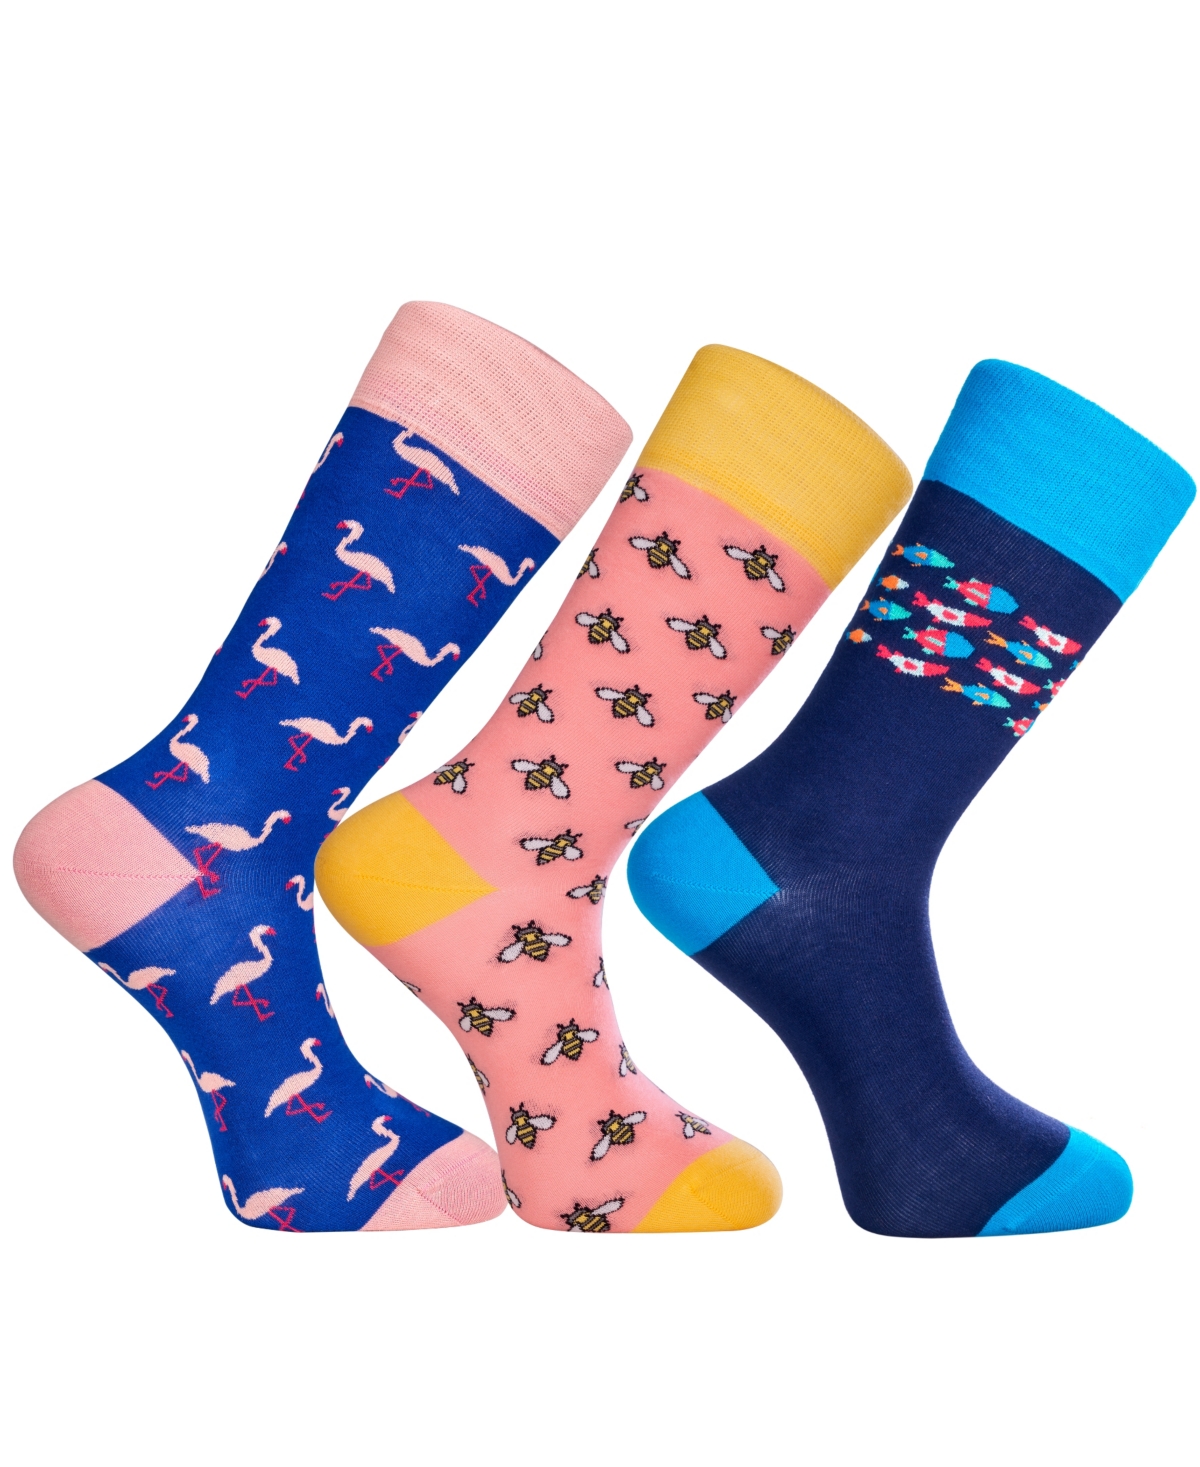 Men's Hawaii Novelty Luxury Crew Socks Bundle Fun Colorful with Seamless Toe Design, Pack of 3 - Multi Color